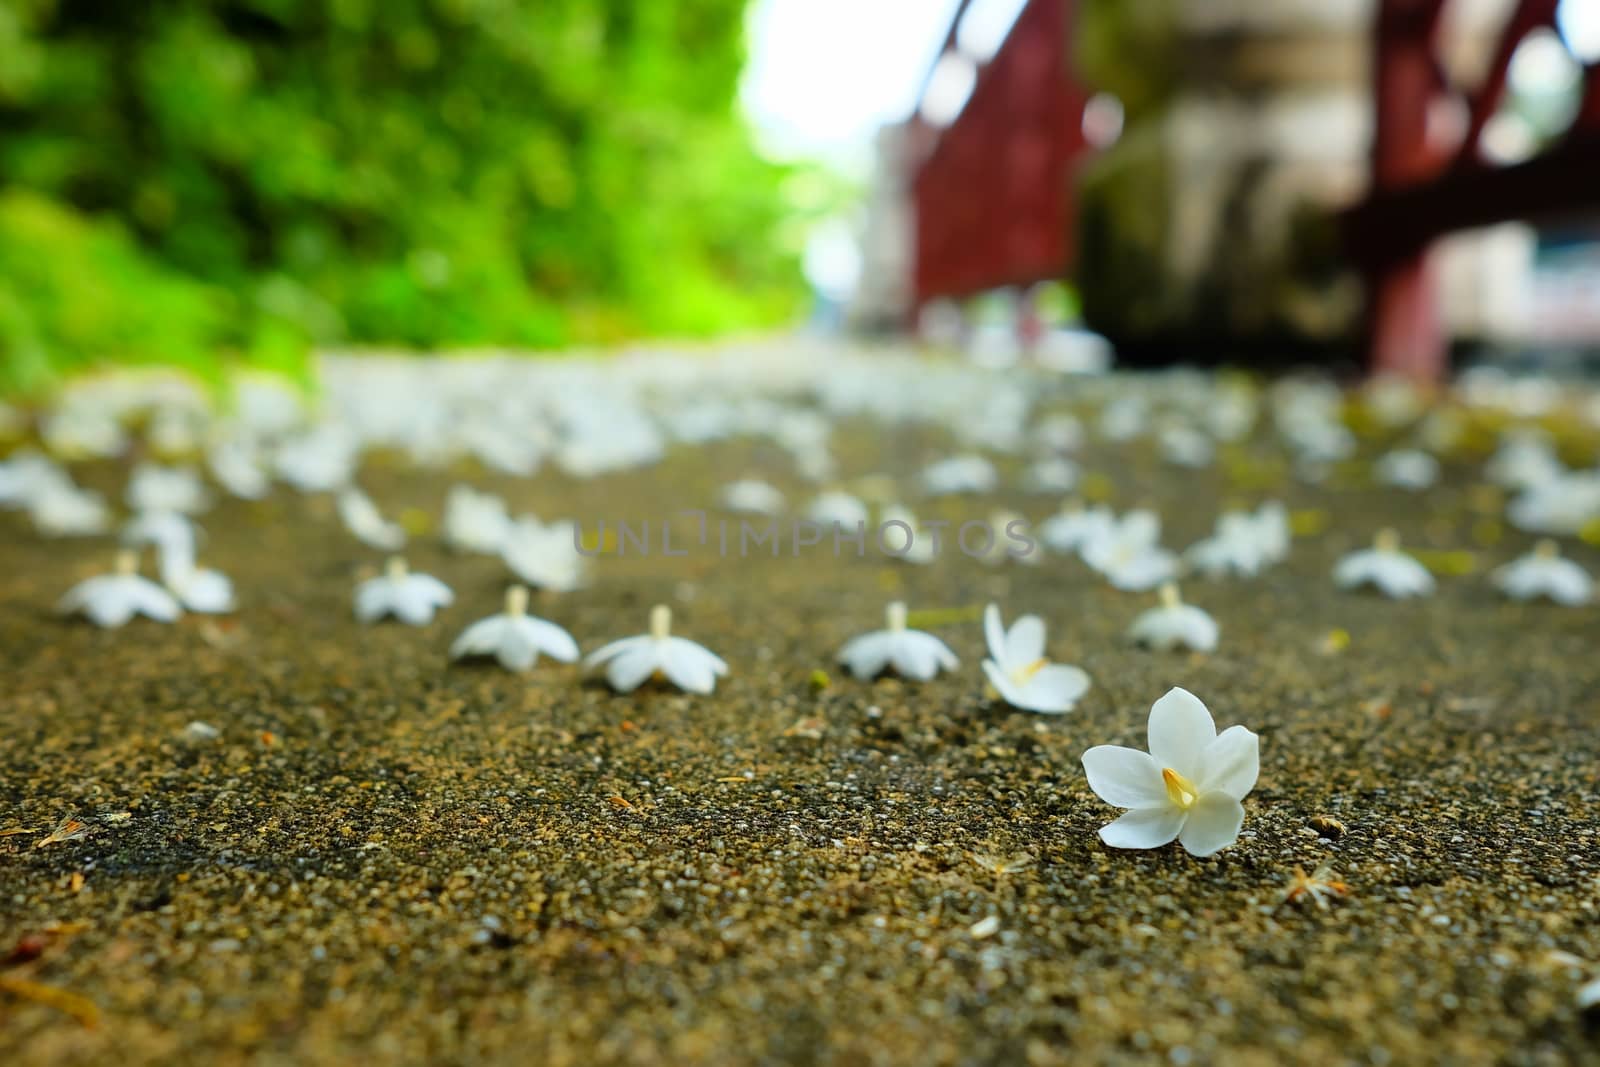 Closed-up White Wild Water Plum Flowers on Ground. (Selective Focus) by mesamong